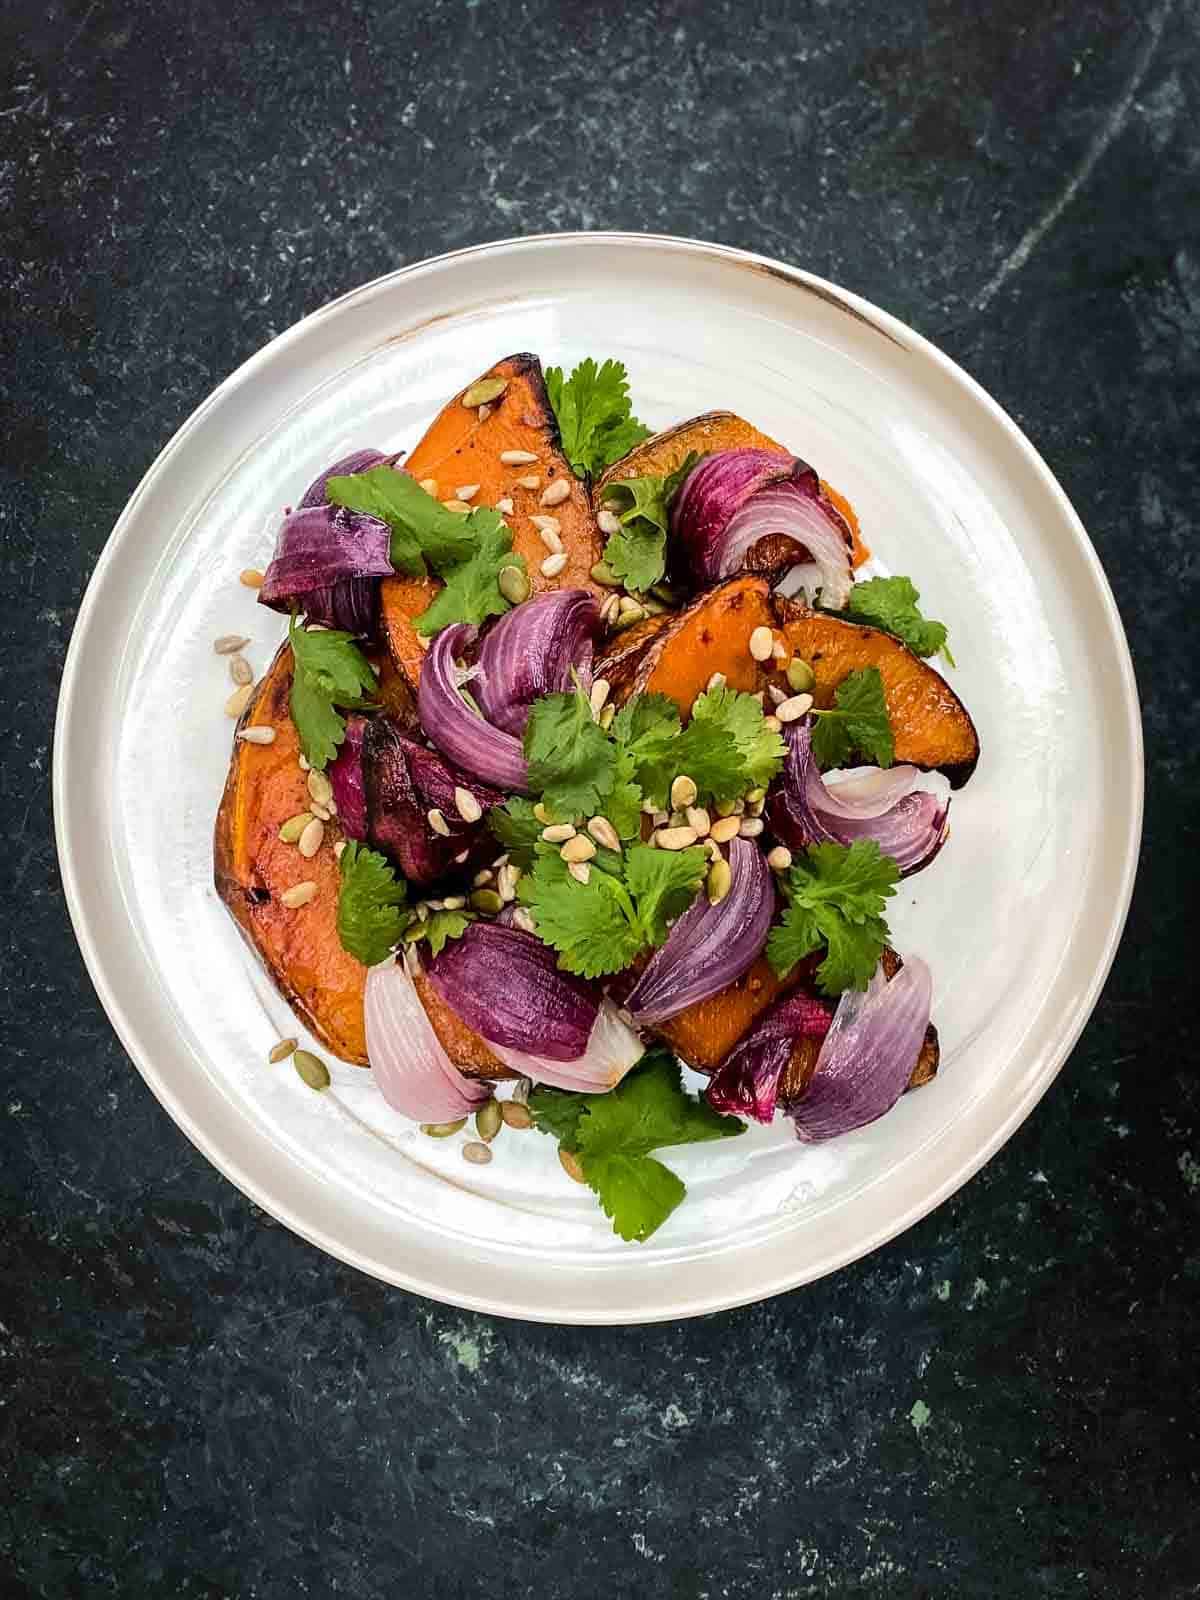 Roasted Spiced Pumpkin Salad on a marbled plate